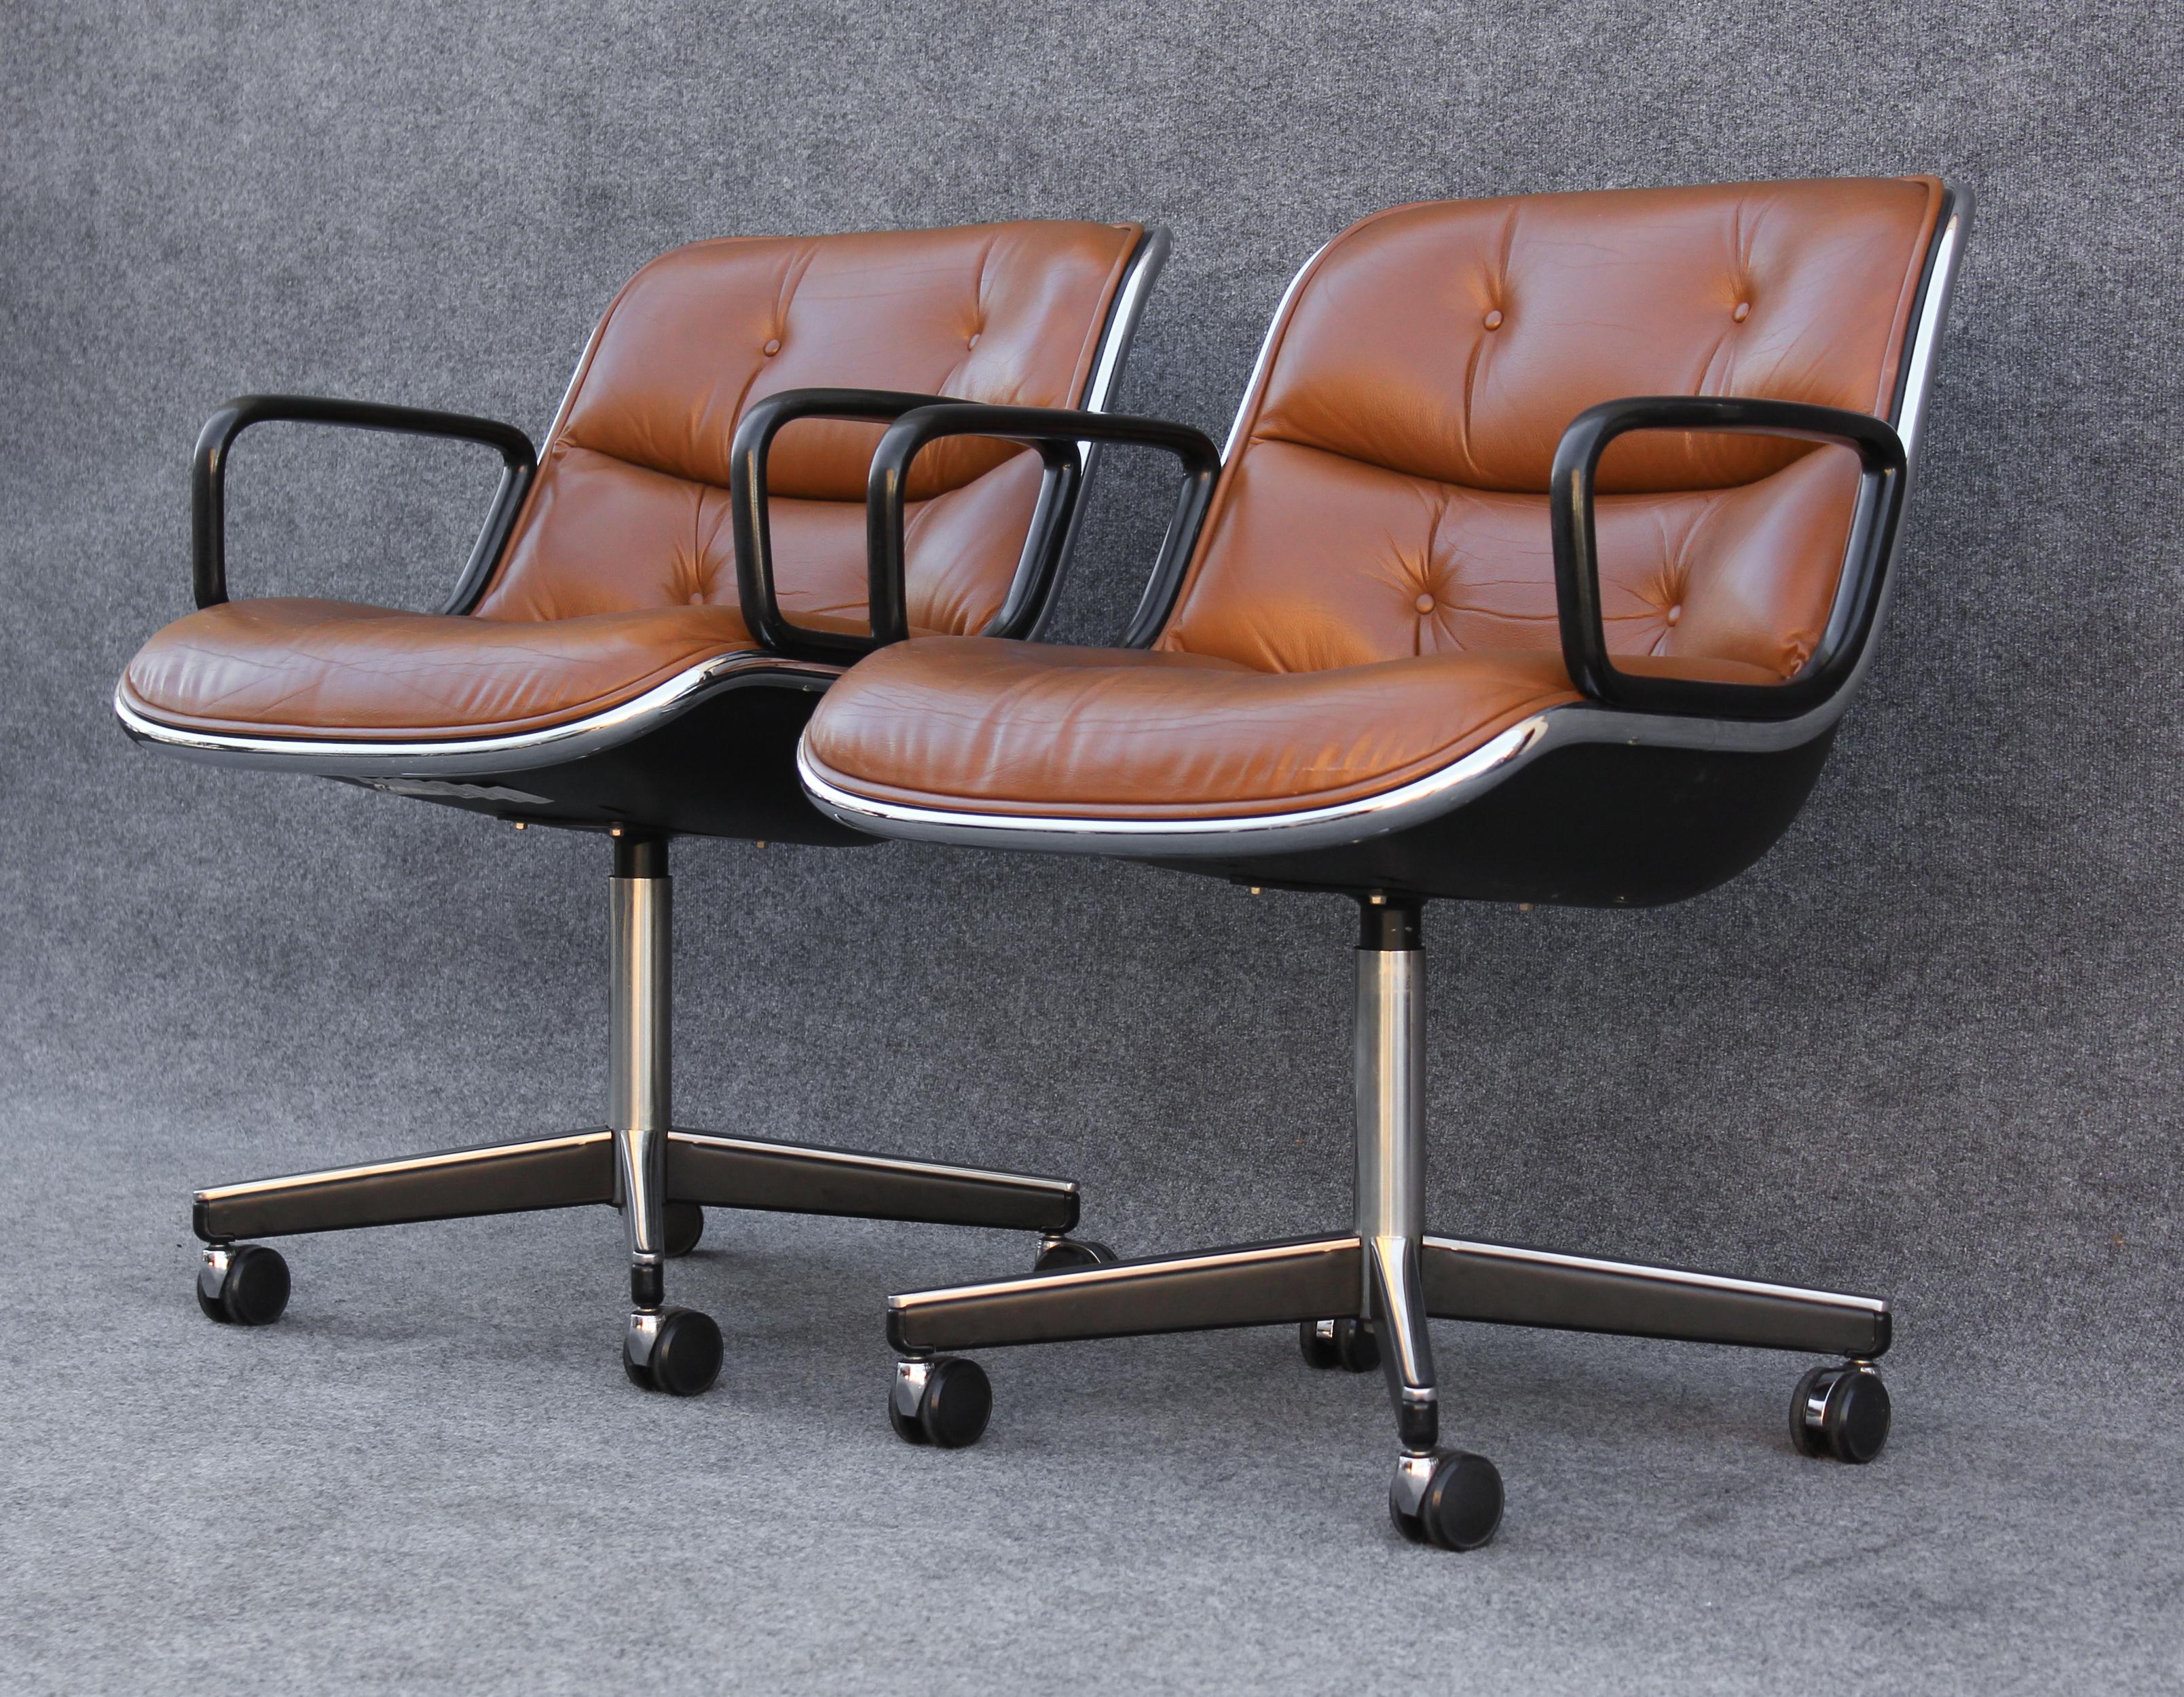 Steel Pair of Charles Pollock for Knoll Arm or Desk Chairs in Brown Leather & Black